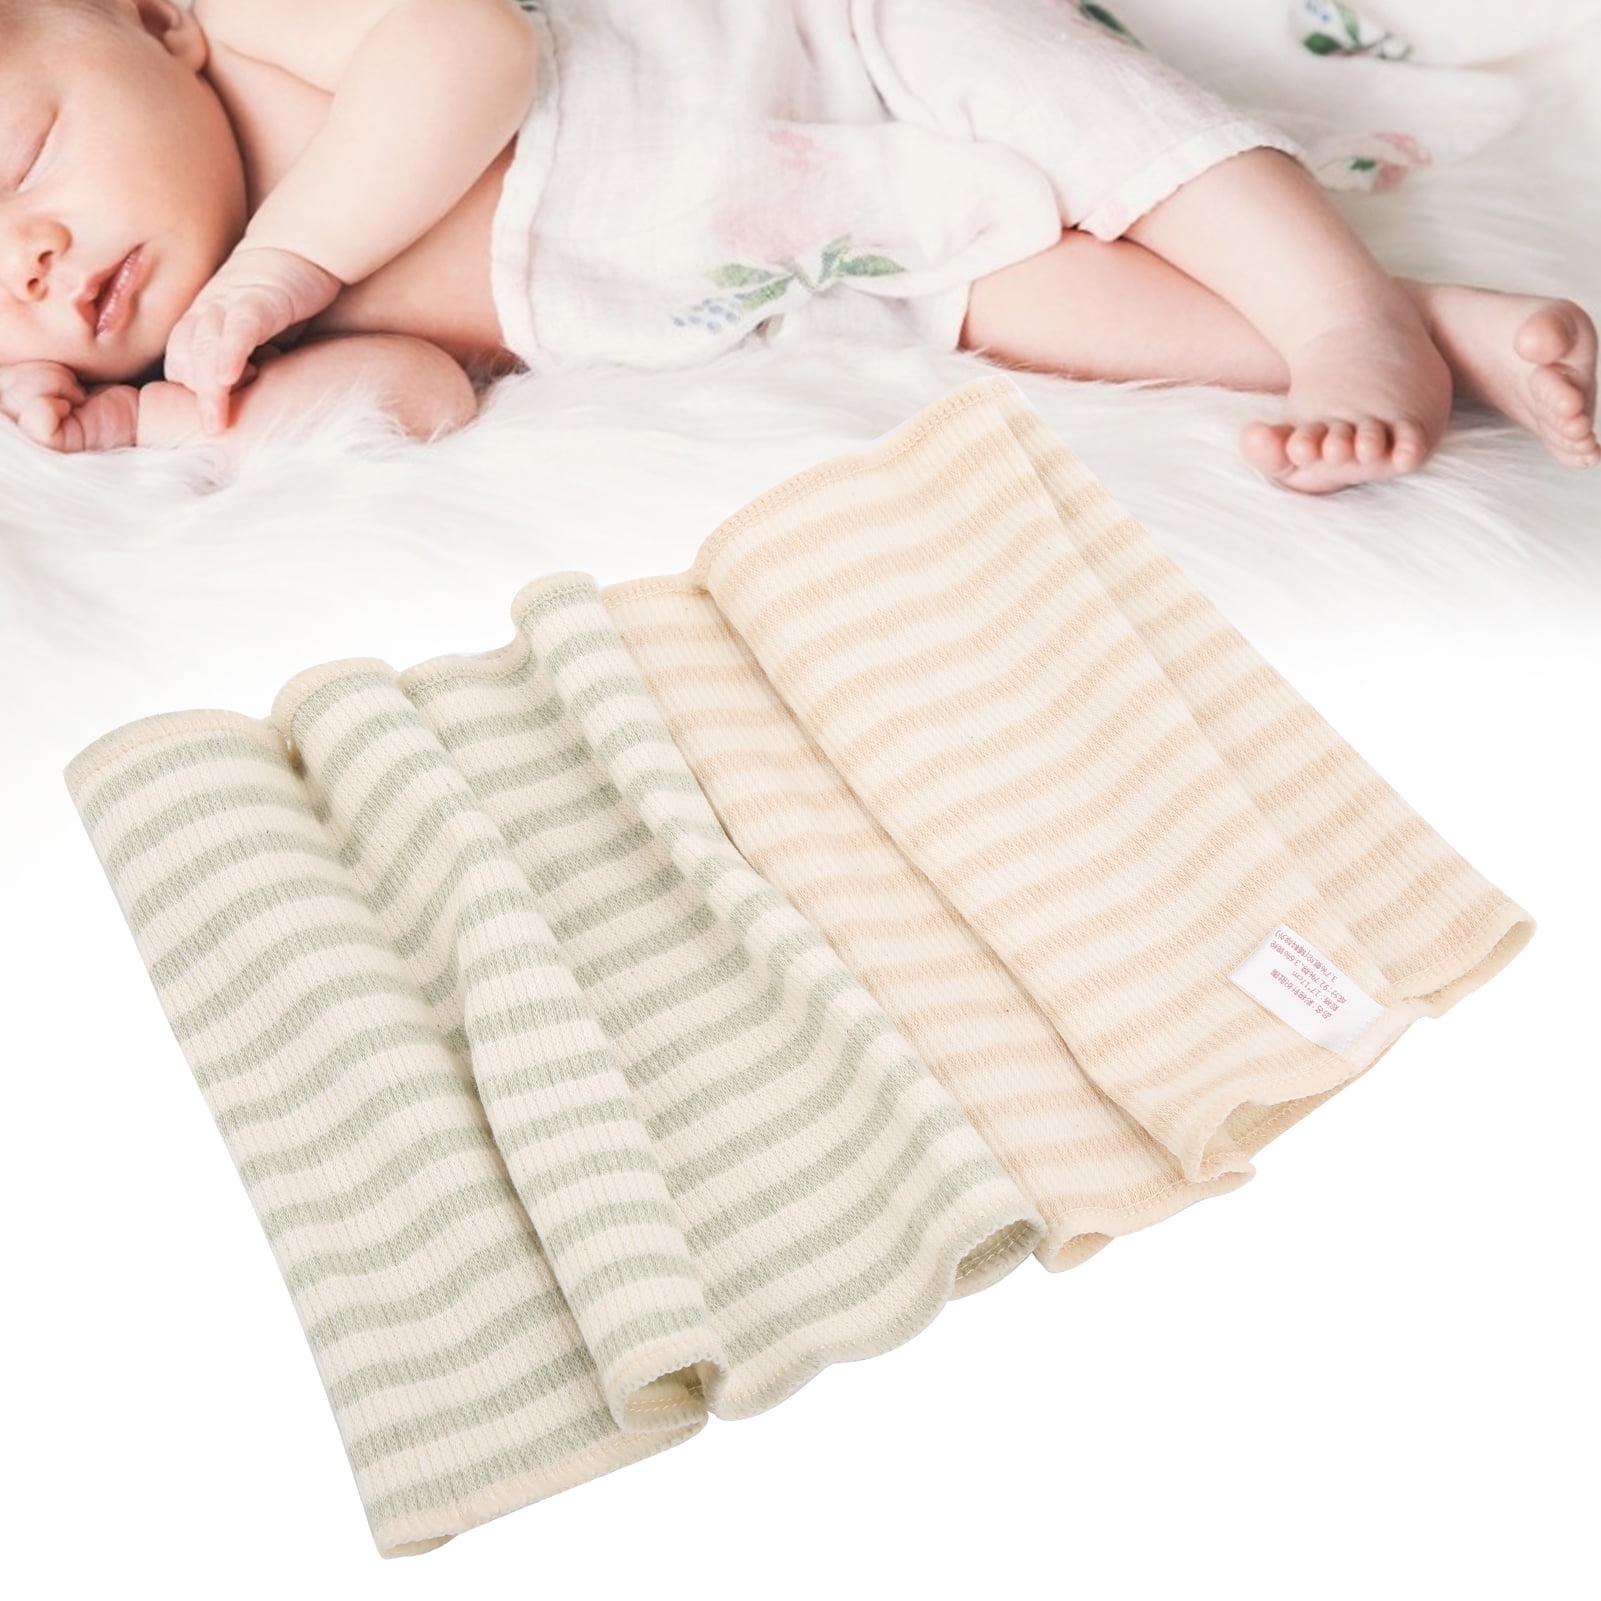 Cute Newborn Baby Infant Umbilical Cord Soft Cotton Protection Warm Belly Band 